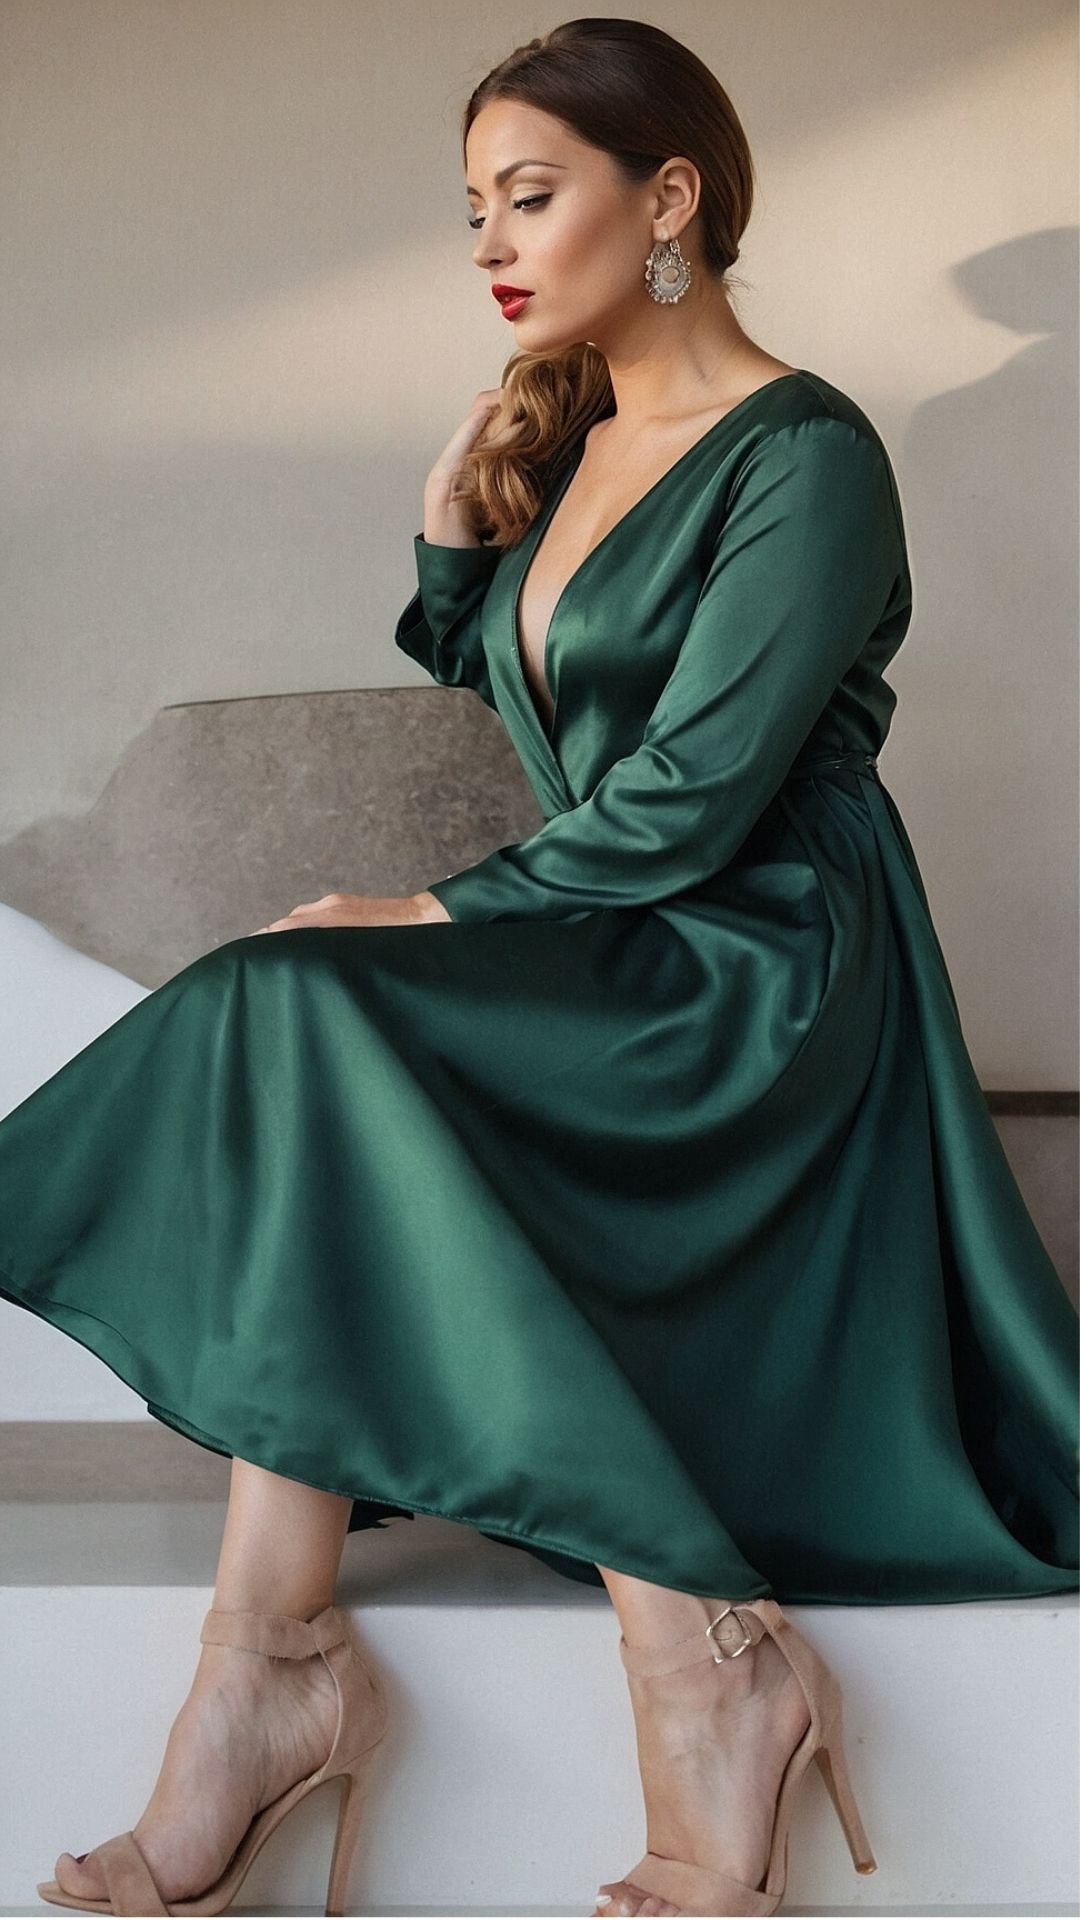 Classic Glamour: Sophisticated Style in Satin Green